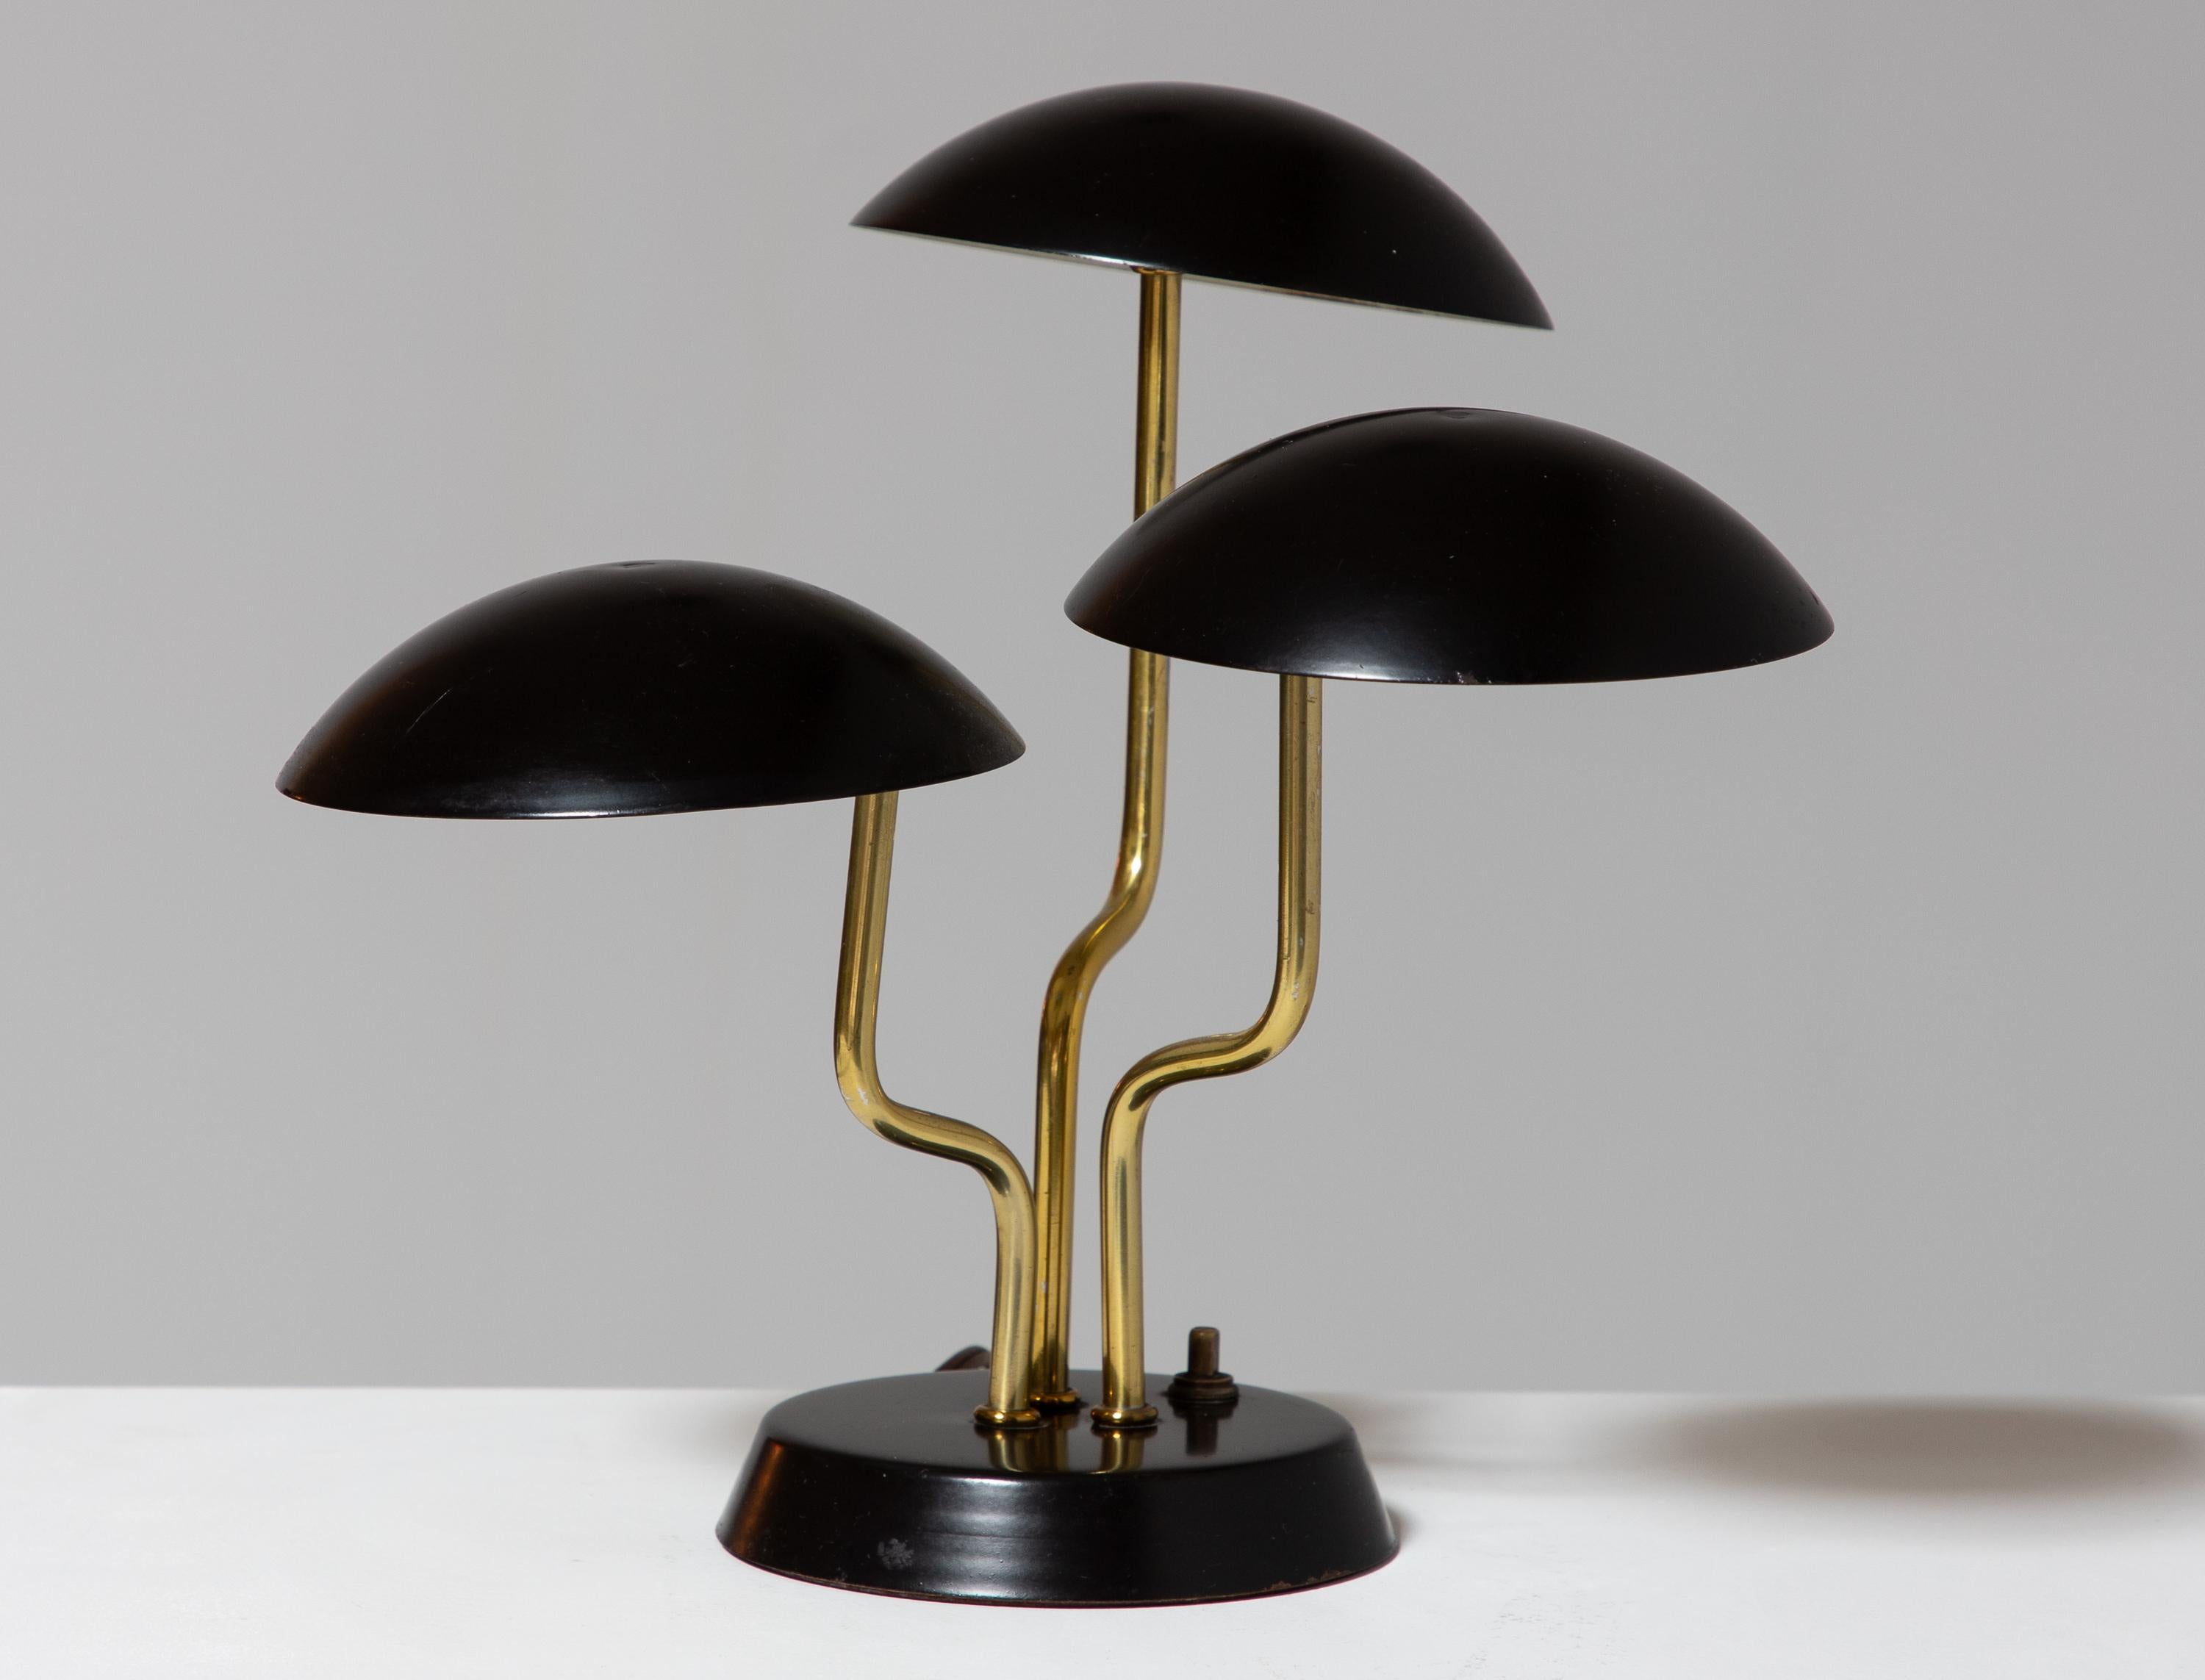 Gino Sarfatti Three Shade Mushroom Lamp in Black and Brass - Pair In Good Condition For Sale In Brooklyn, NY